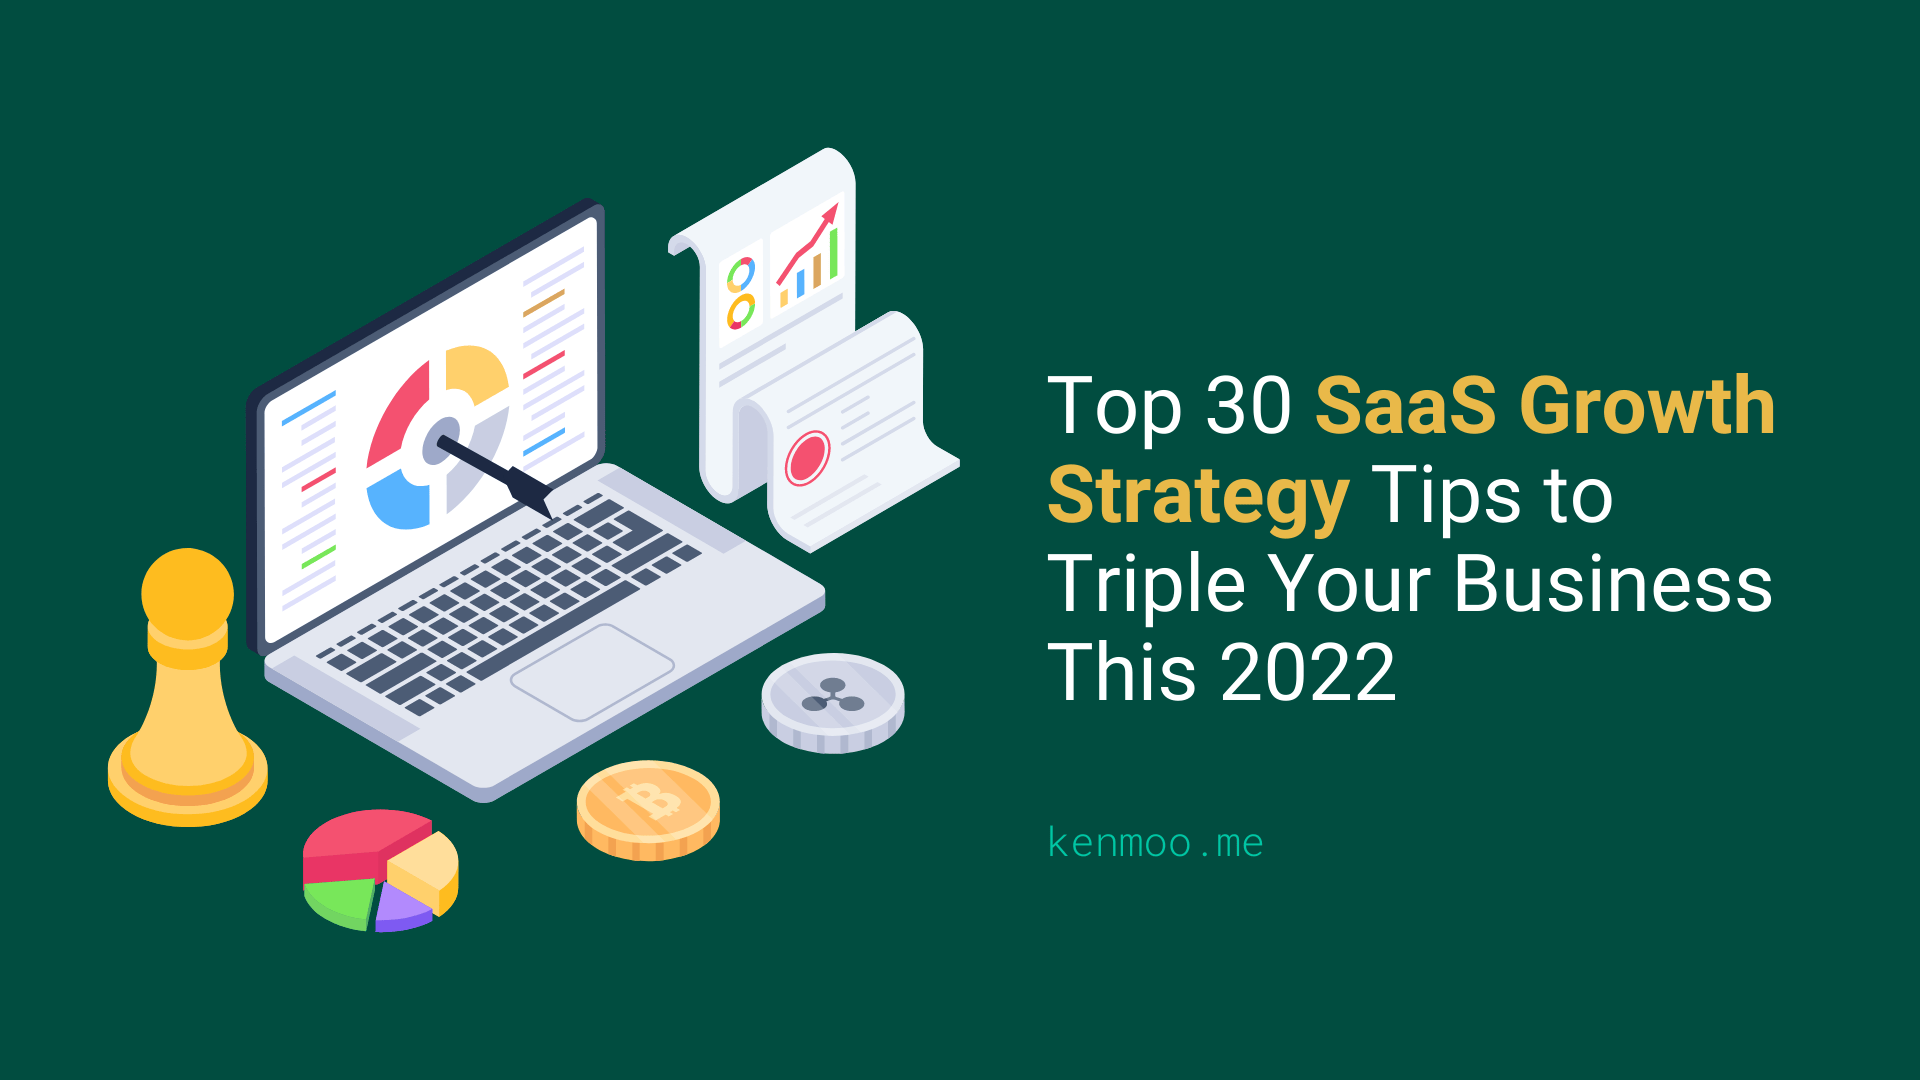 Top 30 SaaS Growth Strategy Tips to Triple Your Business This 2022